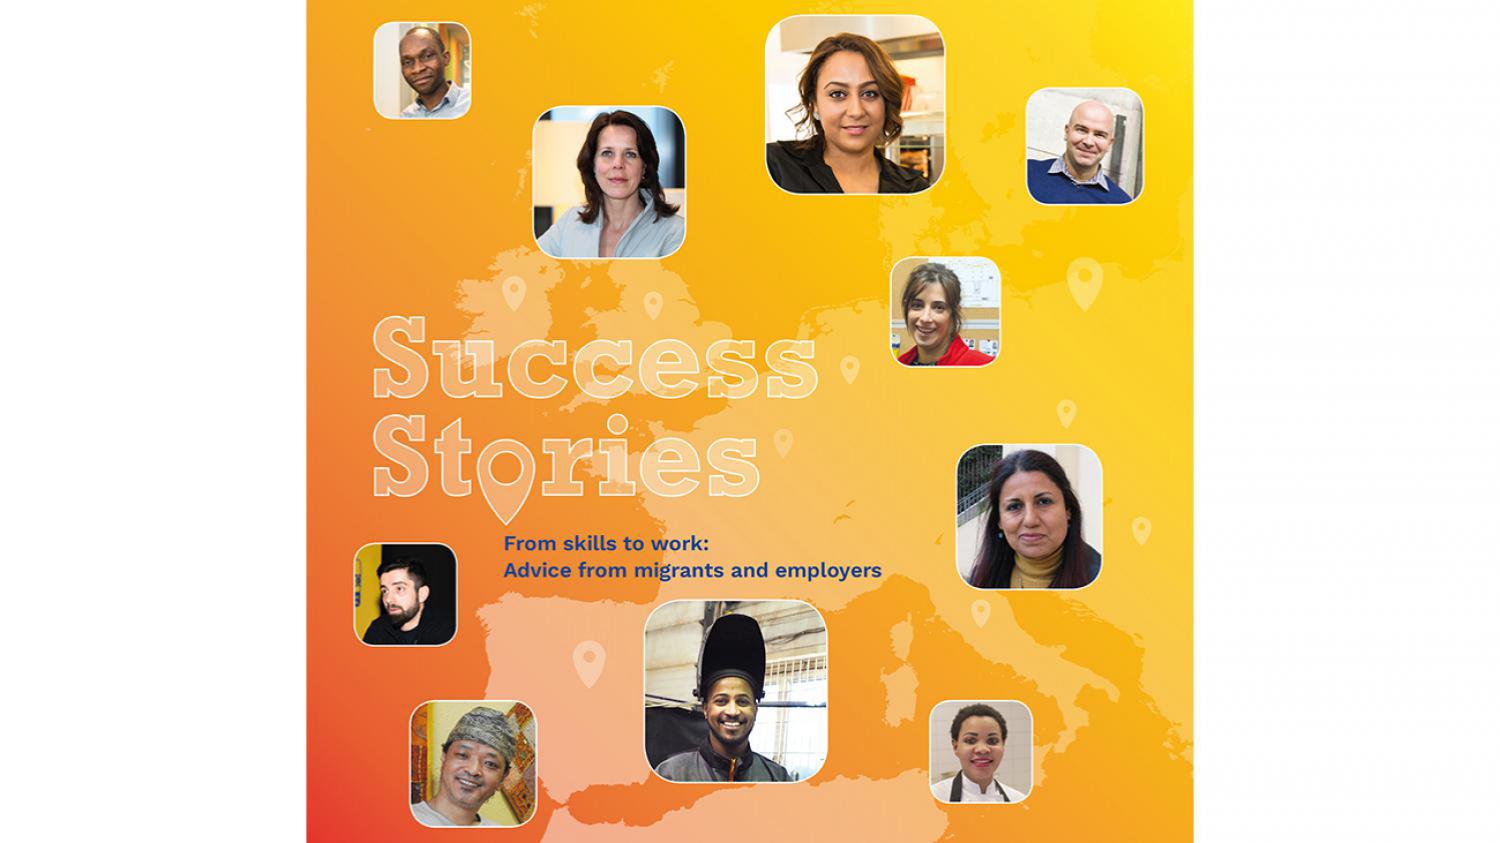 Succes Stories "From Skills2Work" 